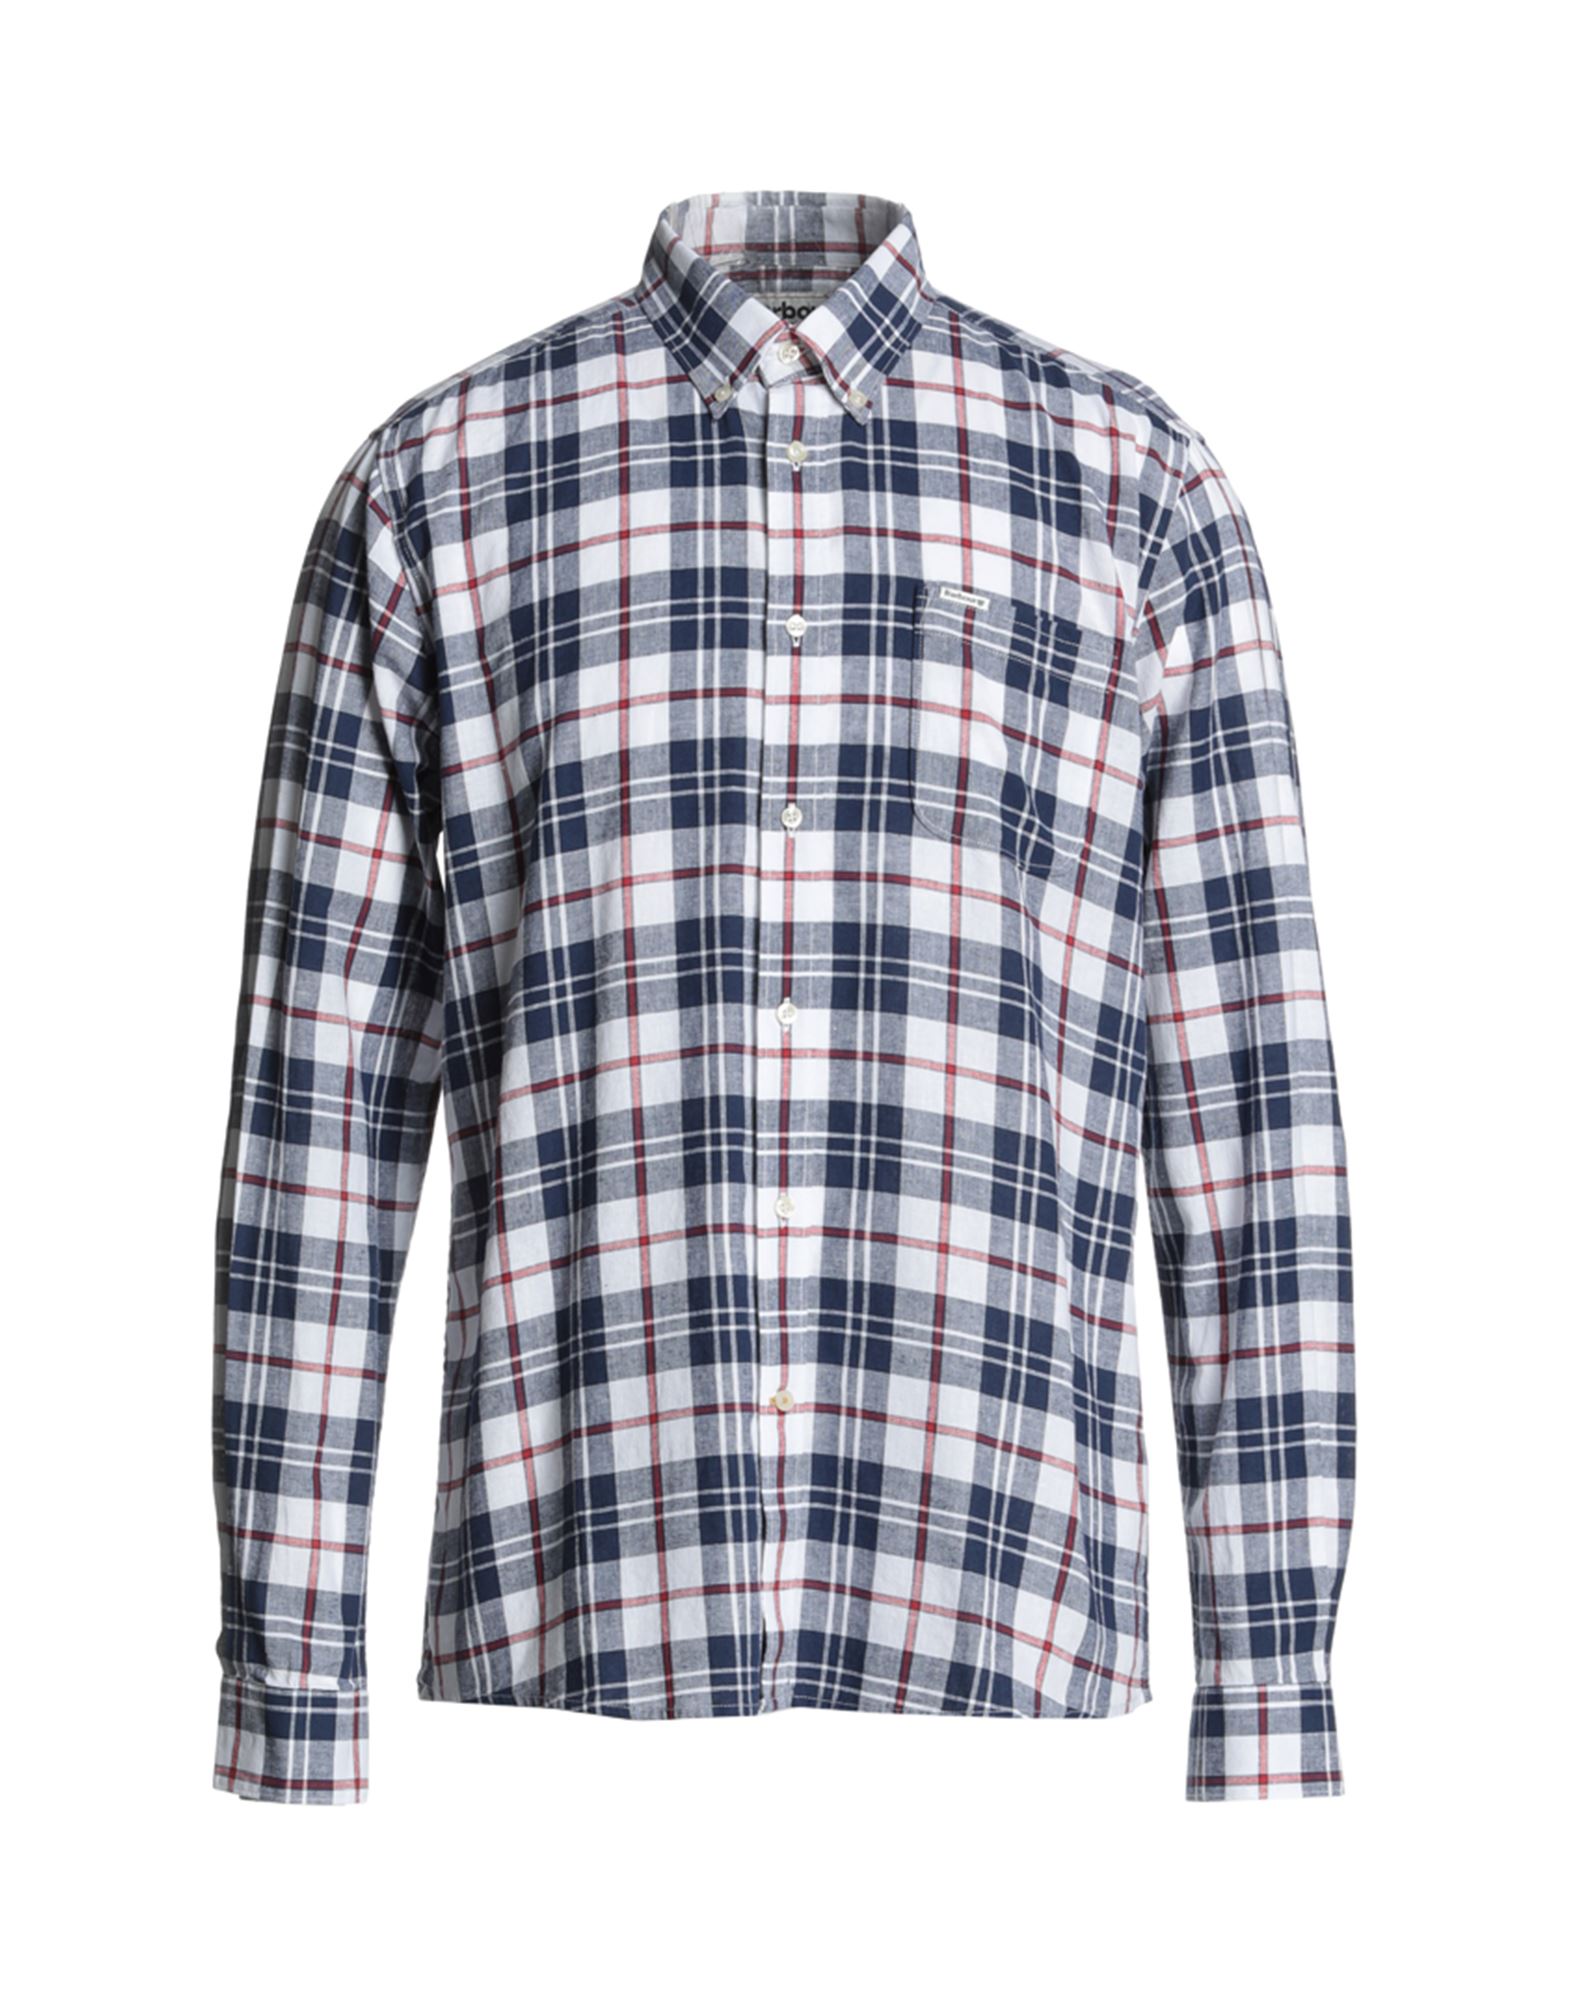 Barbour Shirts In White